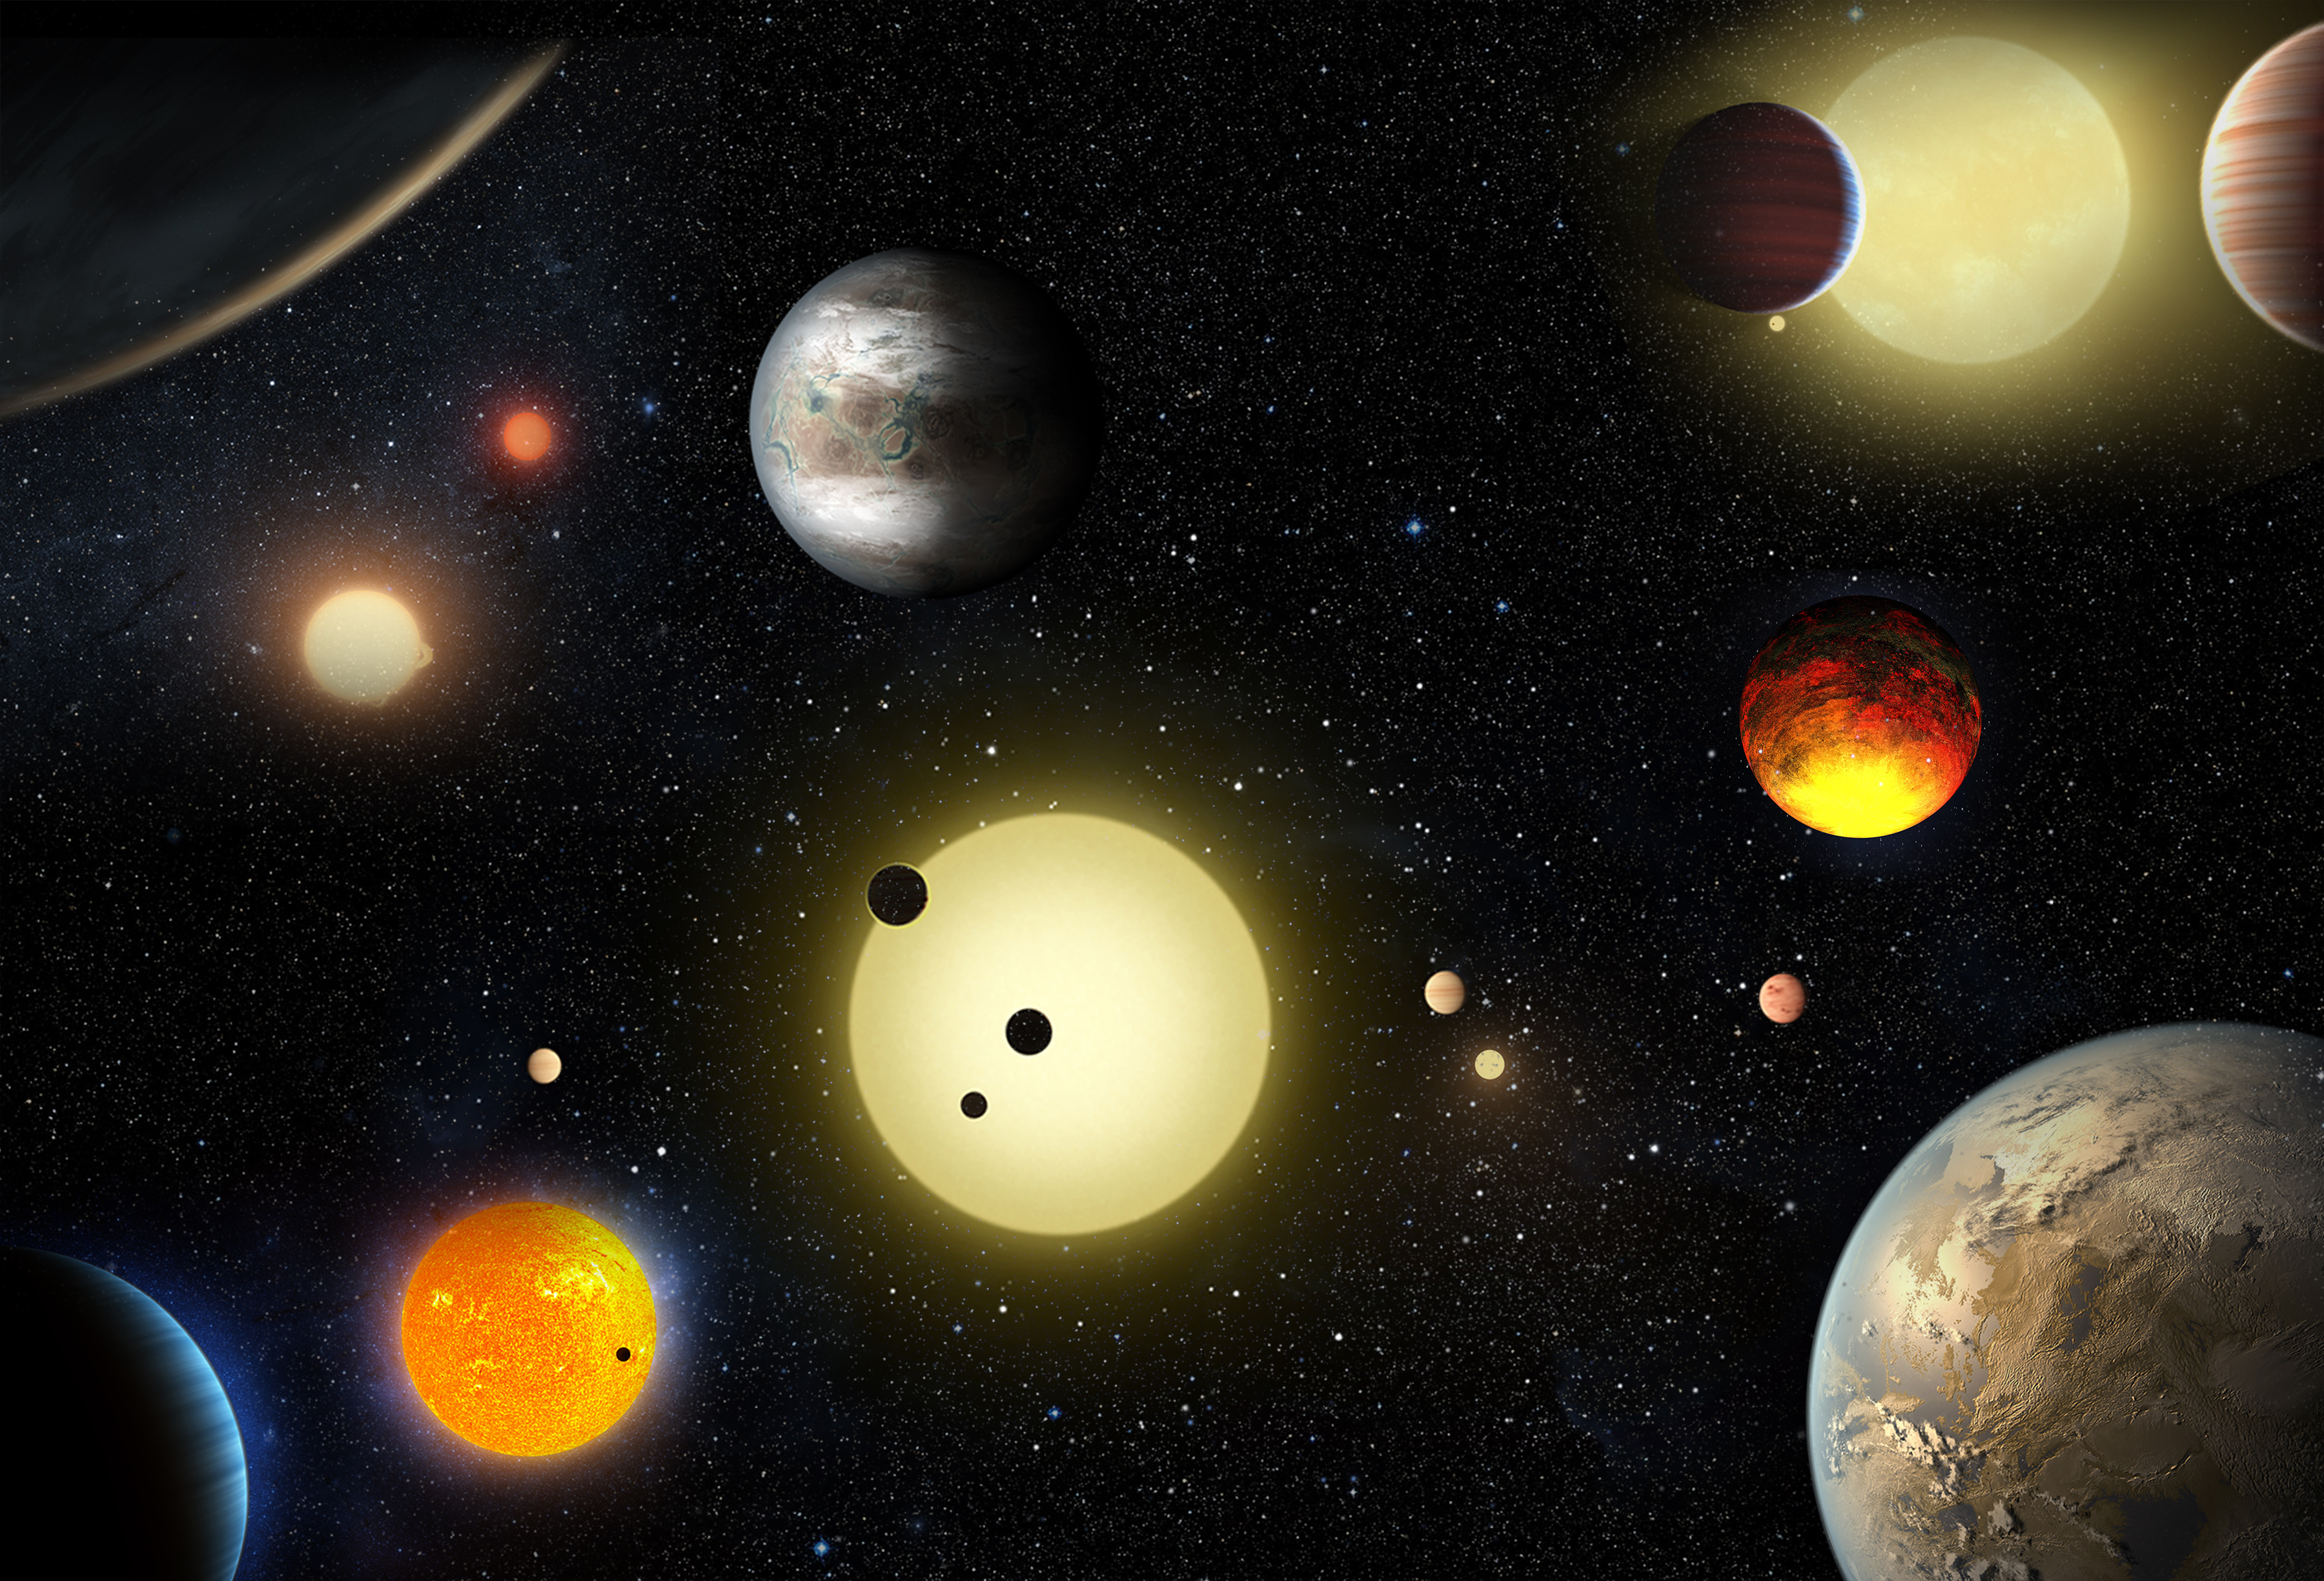 Artist's concept depicting select planetary discoveries made to date by NASA's Kepler space telescope. (NASA/W. Stenzel)